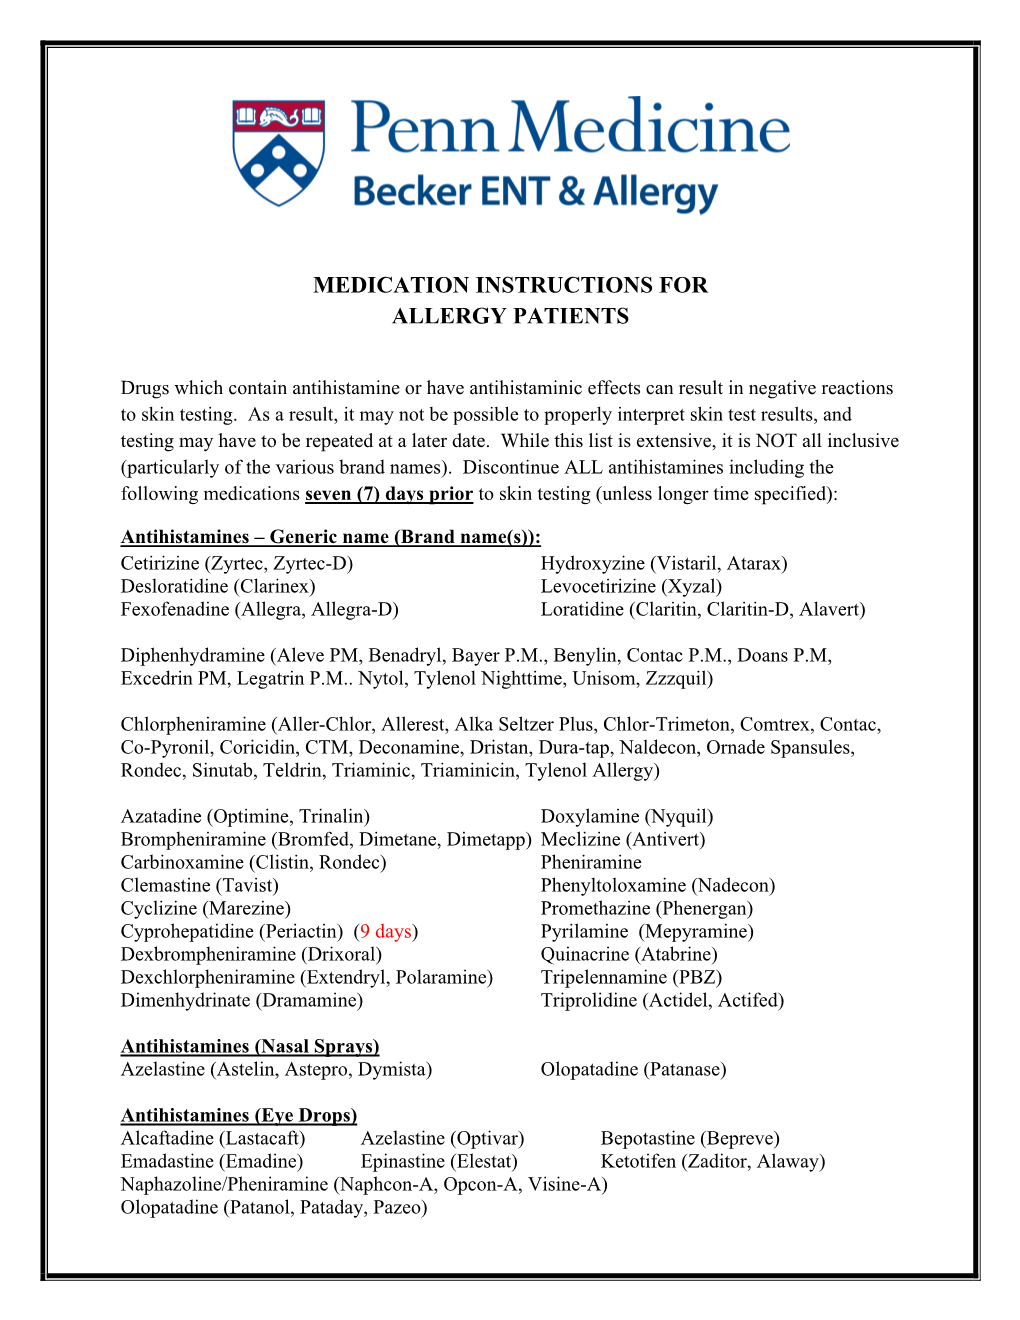 Medication Instructions for Allergy Patients